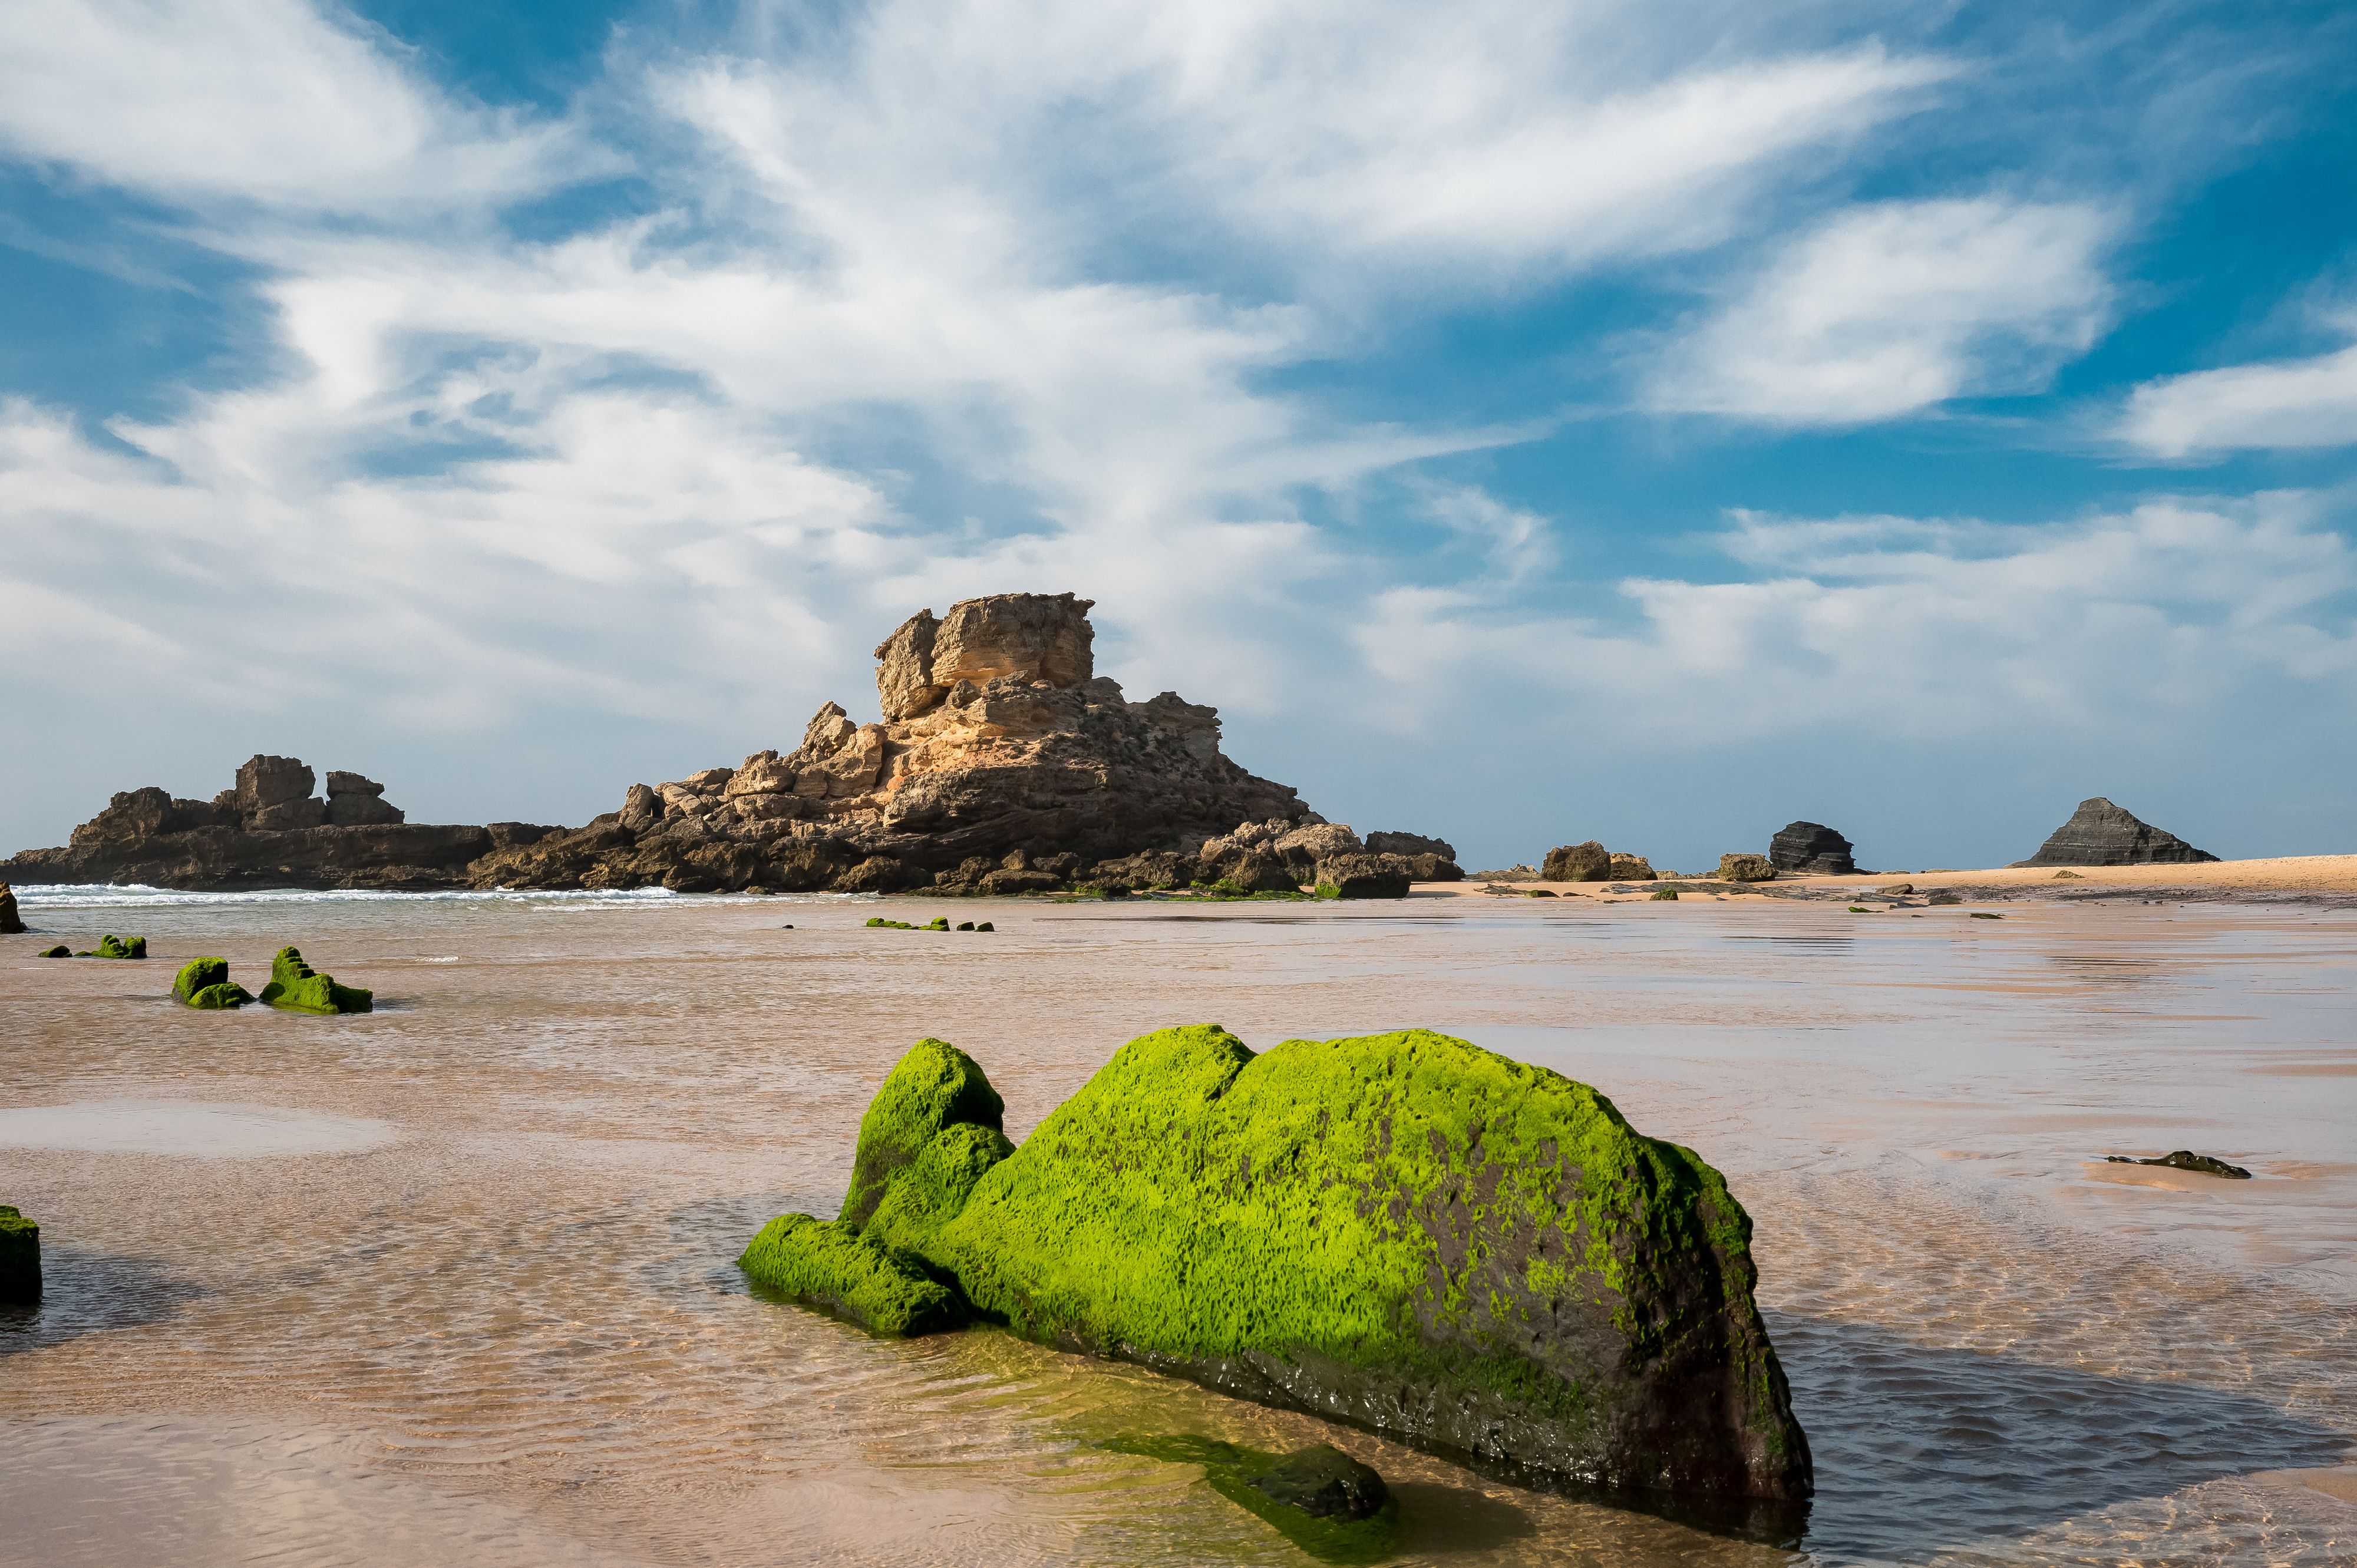 Rocky Portugal beach with mossy rock in foreground